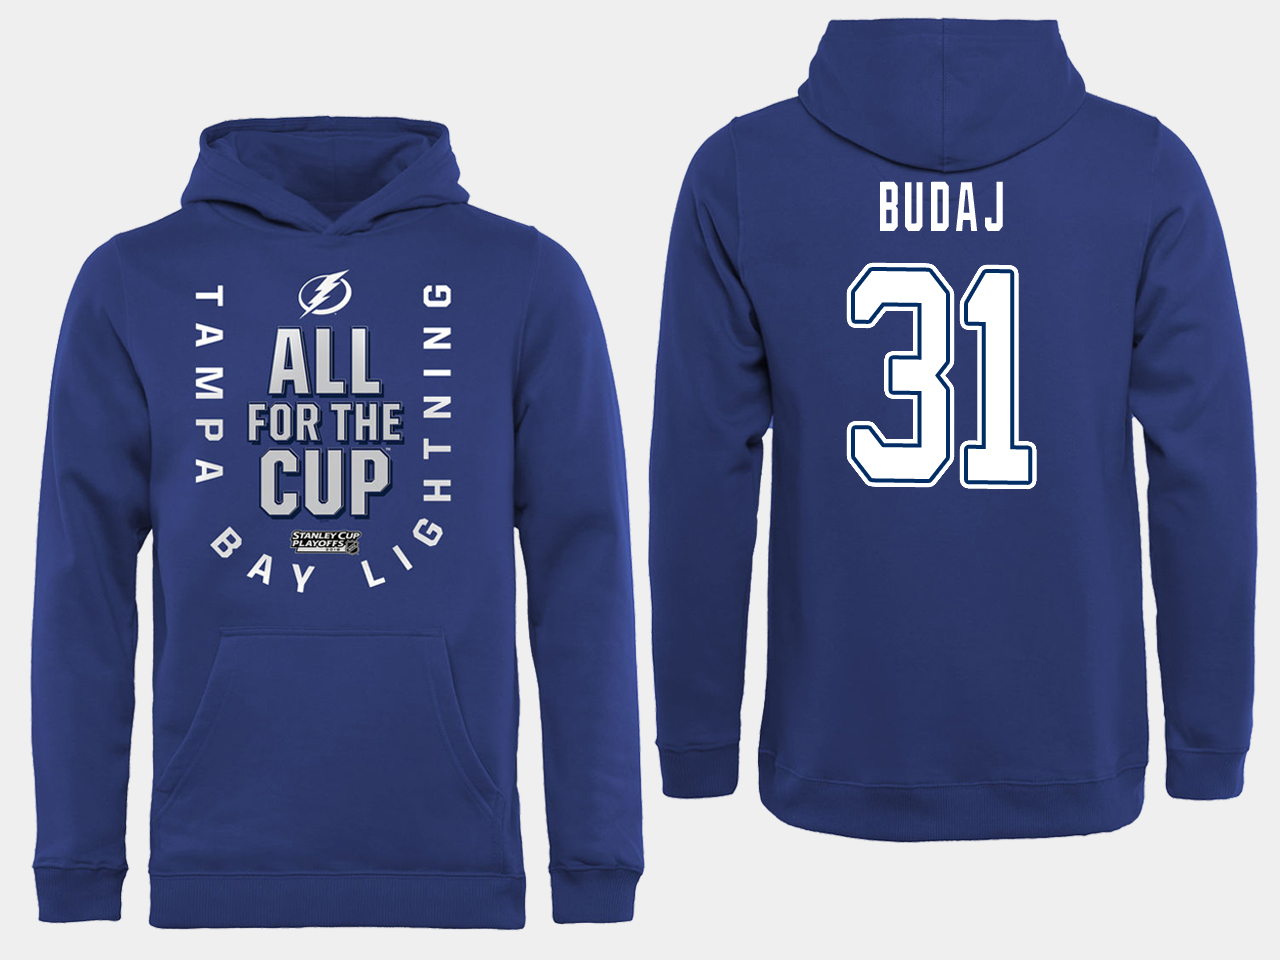 NHL Men adidas Tampa Bay Lightning 31 Budaj blue All for the Cup Hoodie